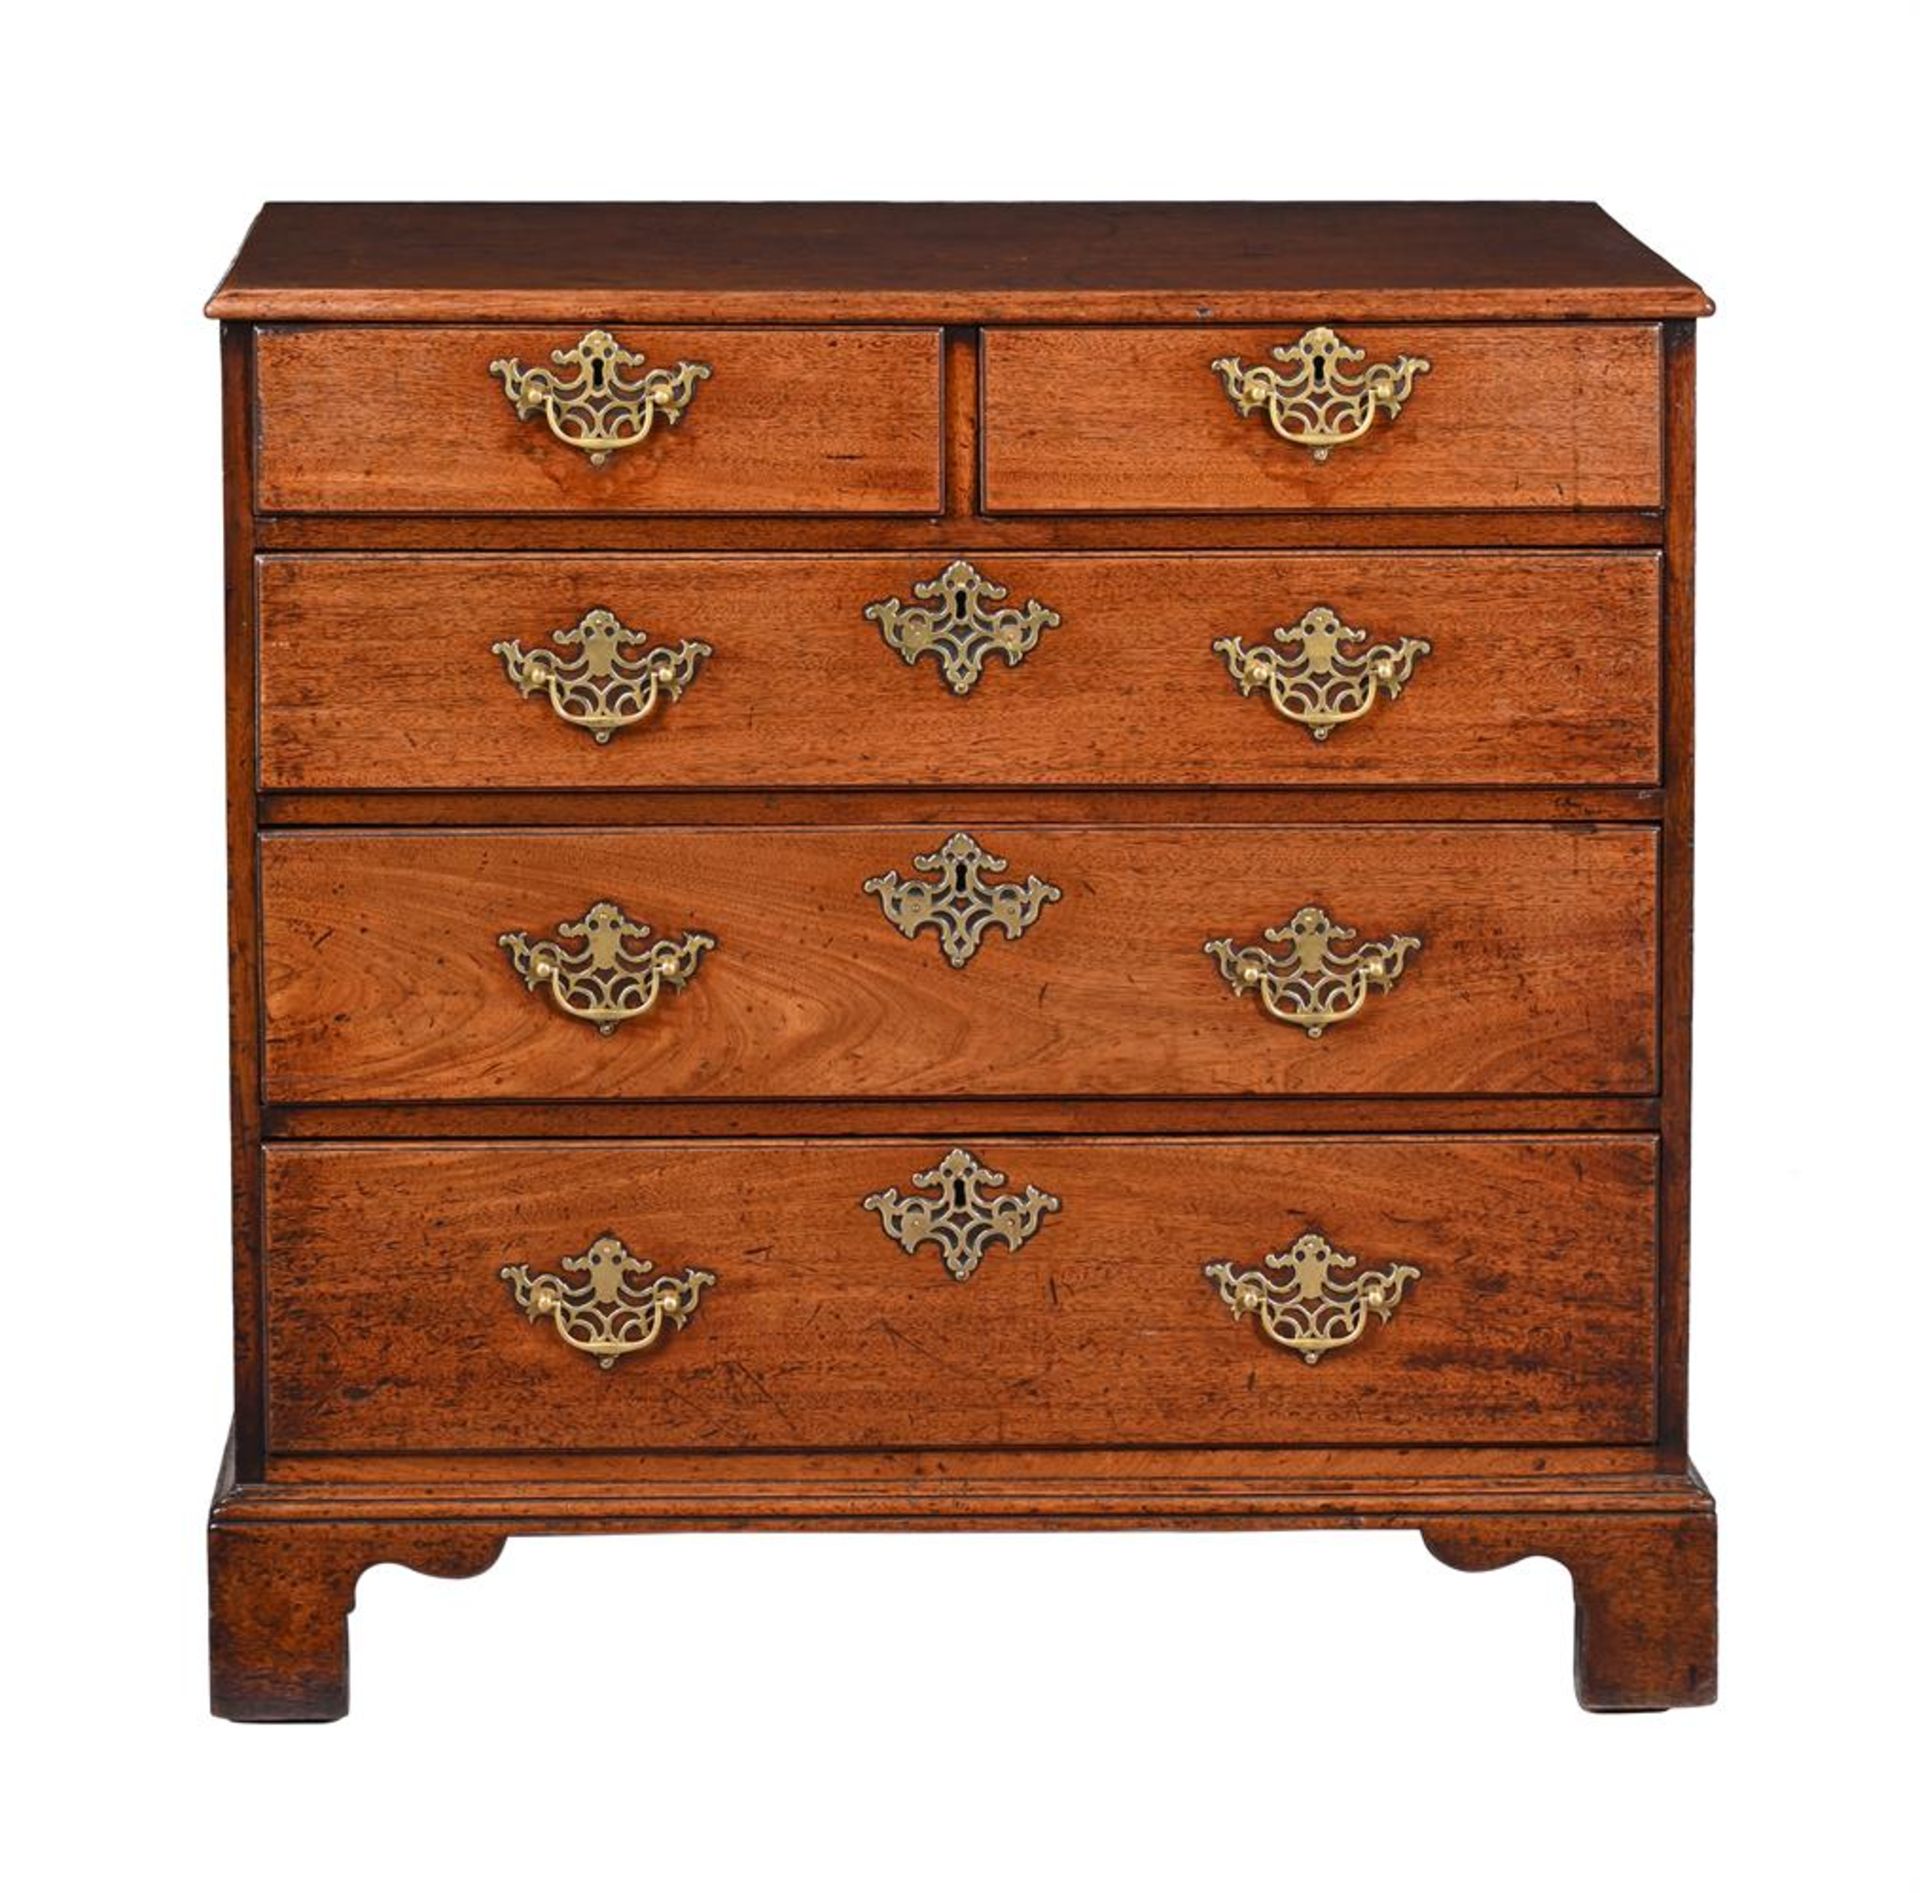 A GEORGE III WALNUT CHEST OF DRAWERS